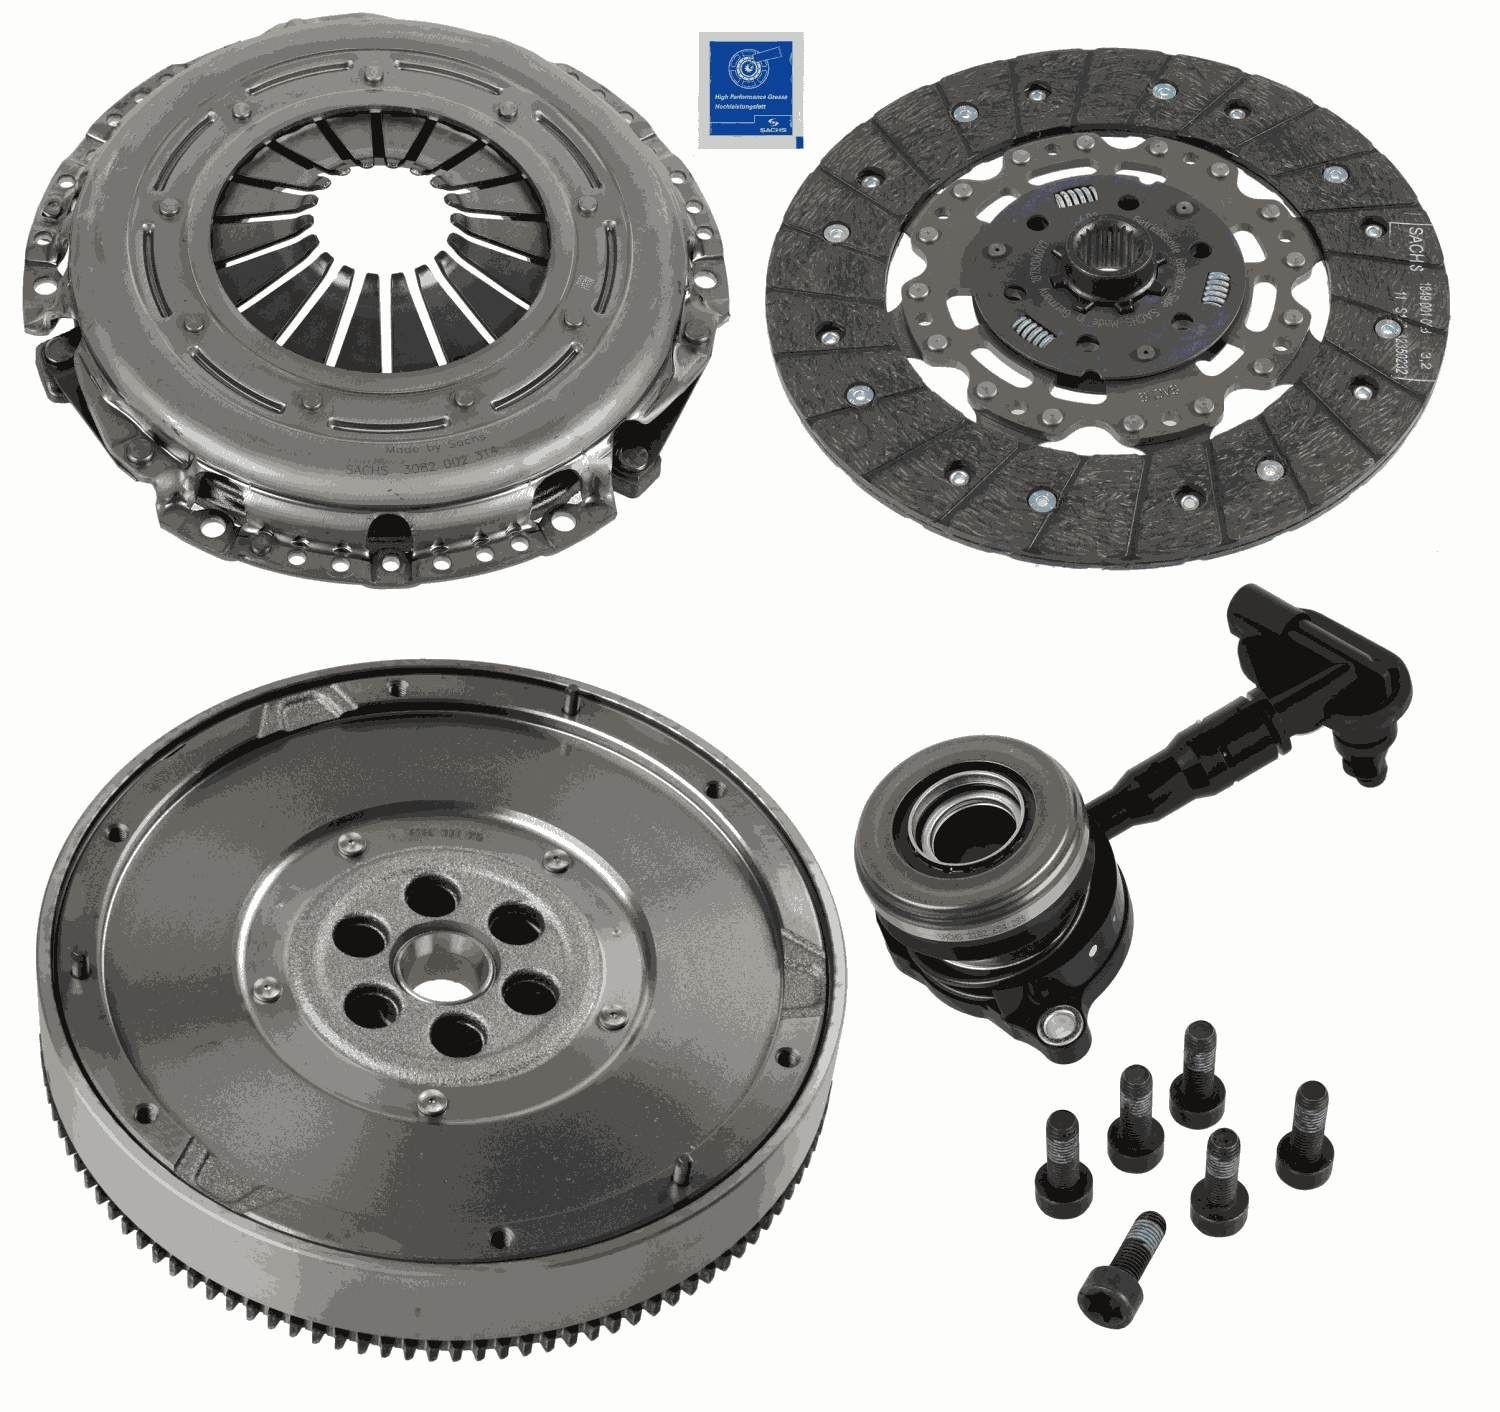 SACHS 2290 601 126 Ford MONDEO 2012 Complete clutch kit